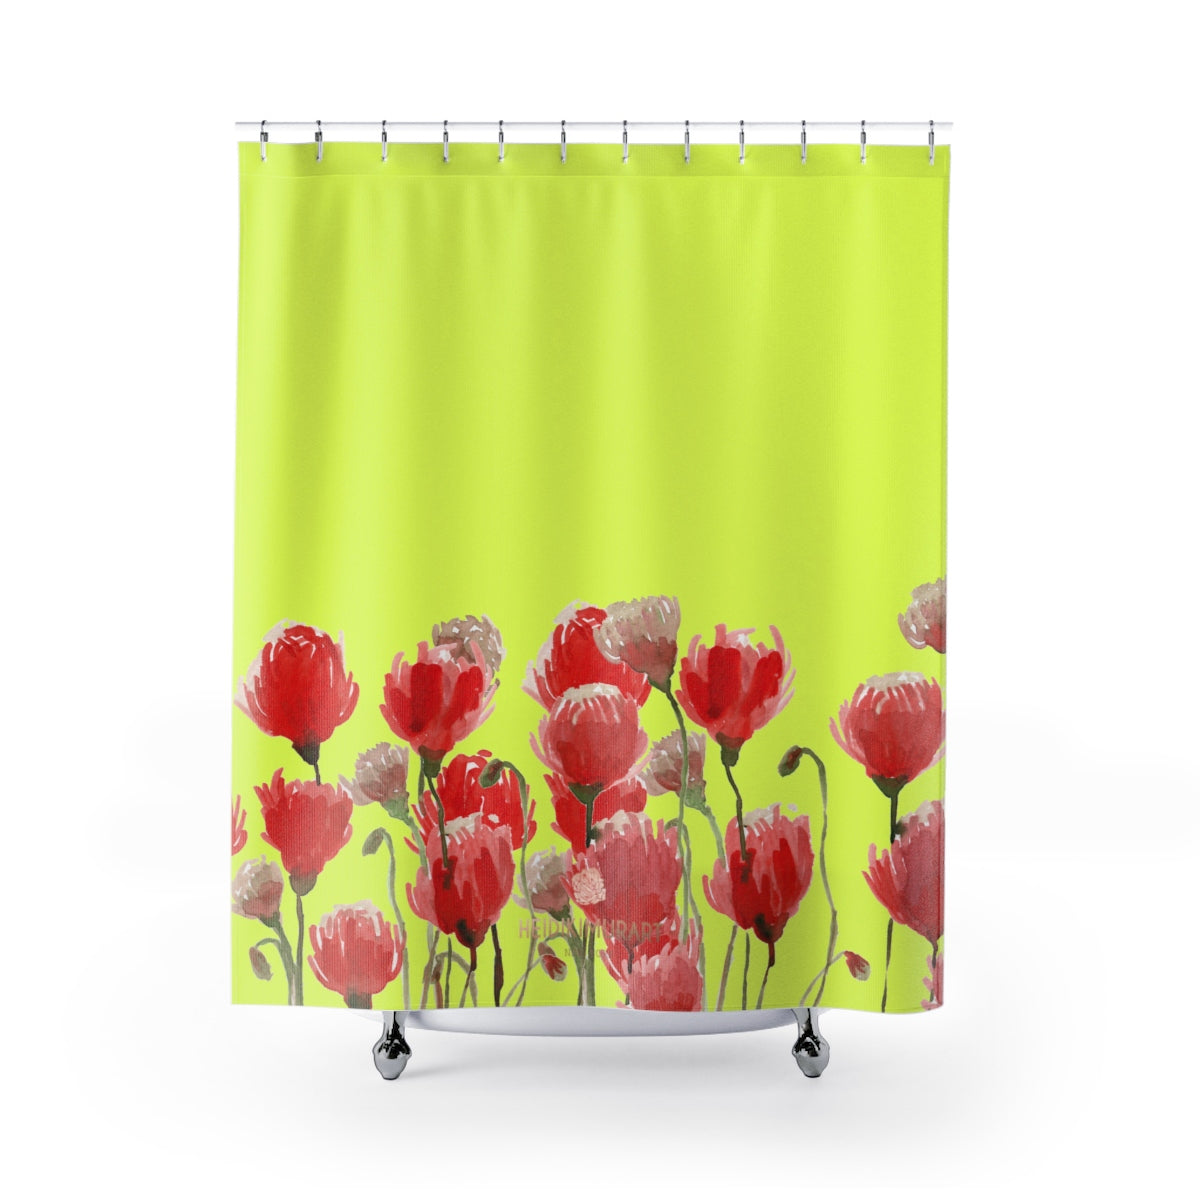 Yellow Red Poppy Flower Floral Print Designer Polyester Shower Curtains- Made in USA-Shower Curtain-71" x 74"-Heidi Kimura Art LLC Yellow Red Poppy Bath Curtains, Yellow Red Poppy Flower Floral Print Designer Polyester Shower Curtains- Printed in USA, Premium Bathroom Shower Curtains Home Decor Large 100% Polyester 71x74 inches  